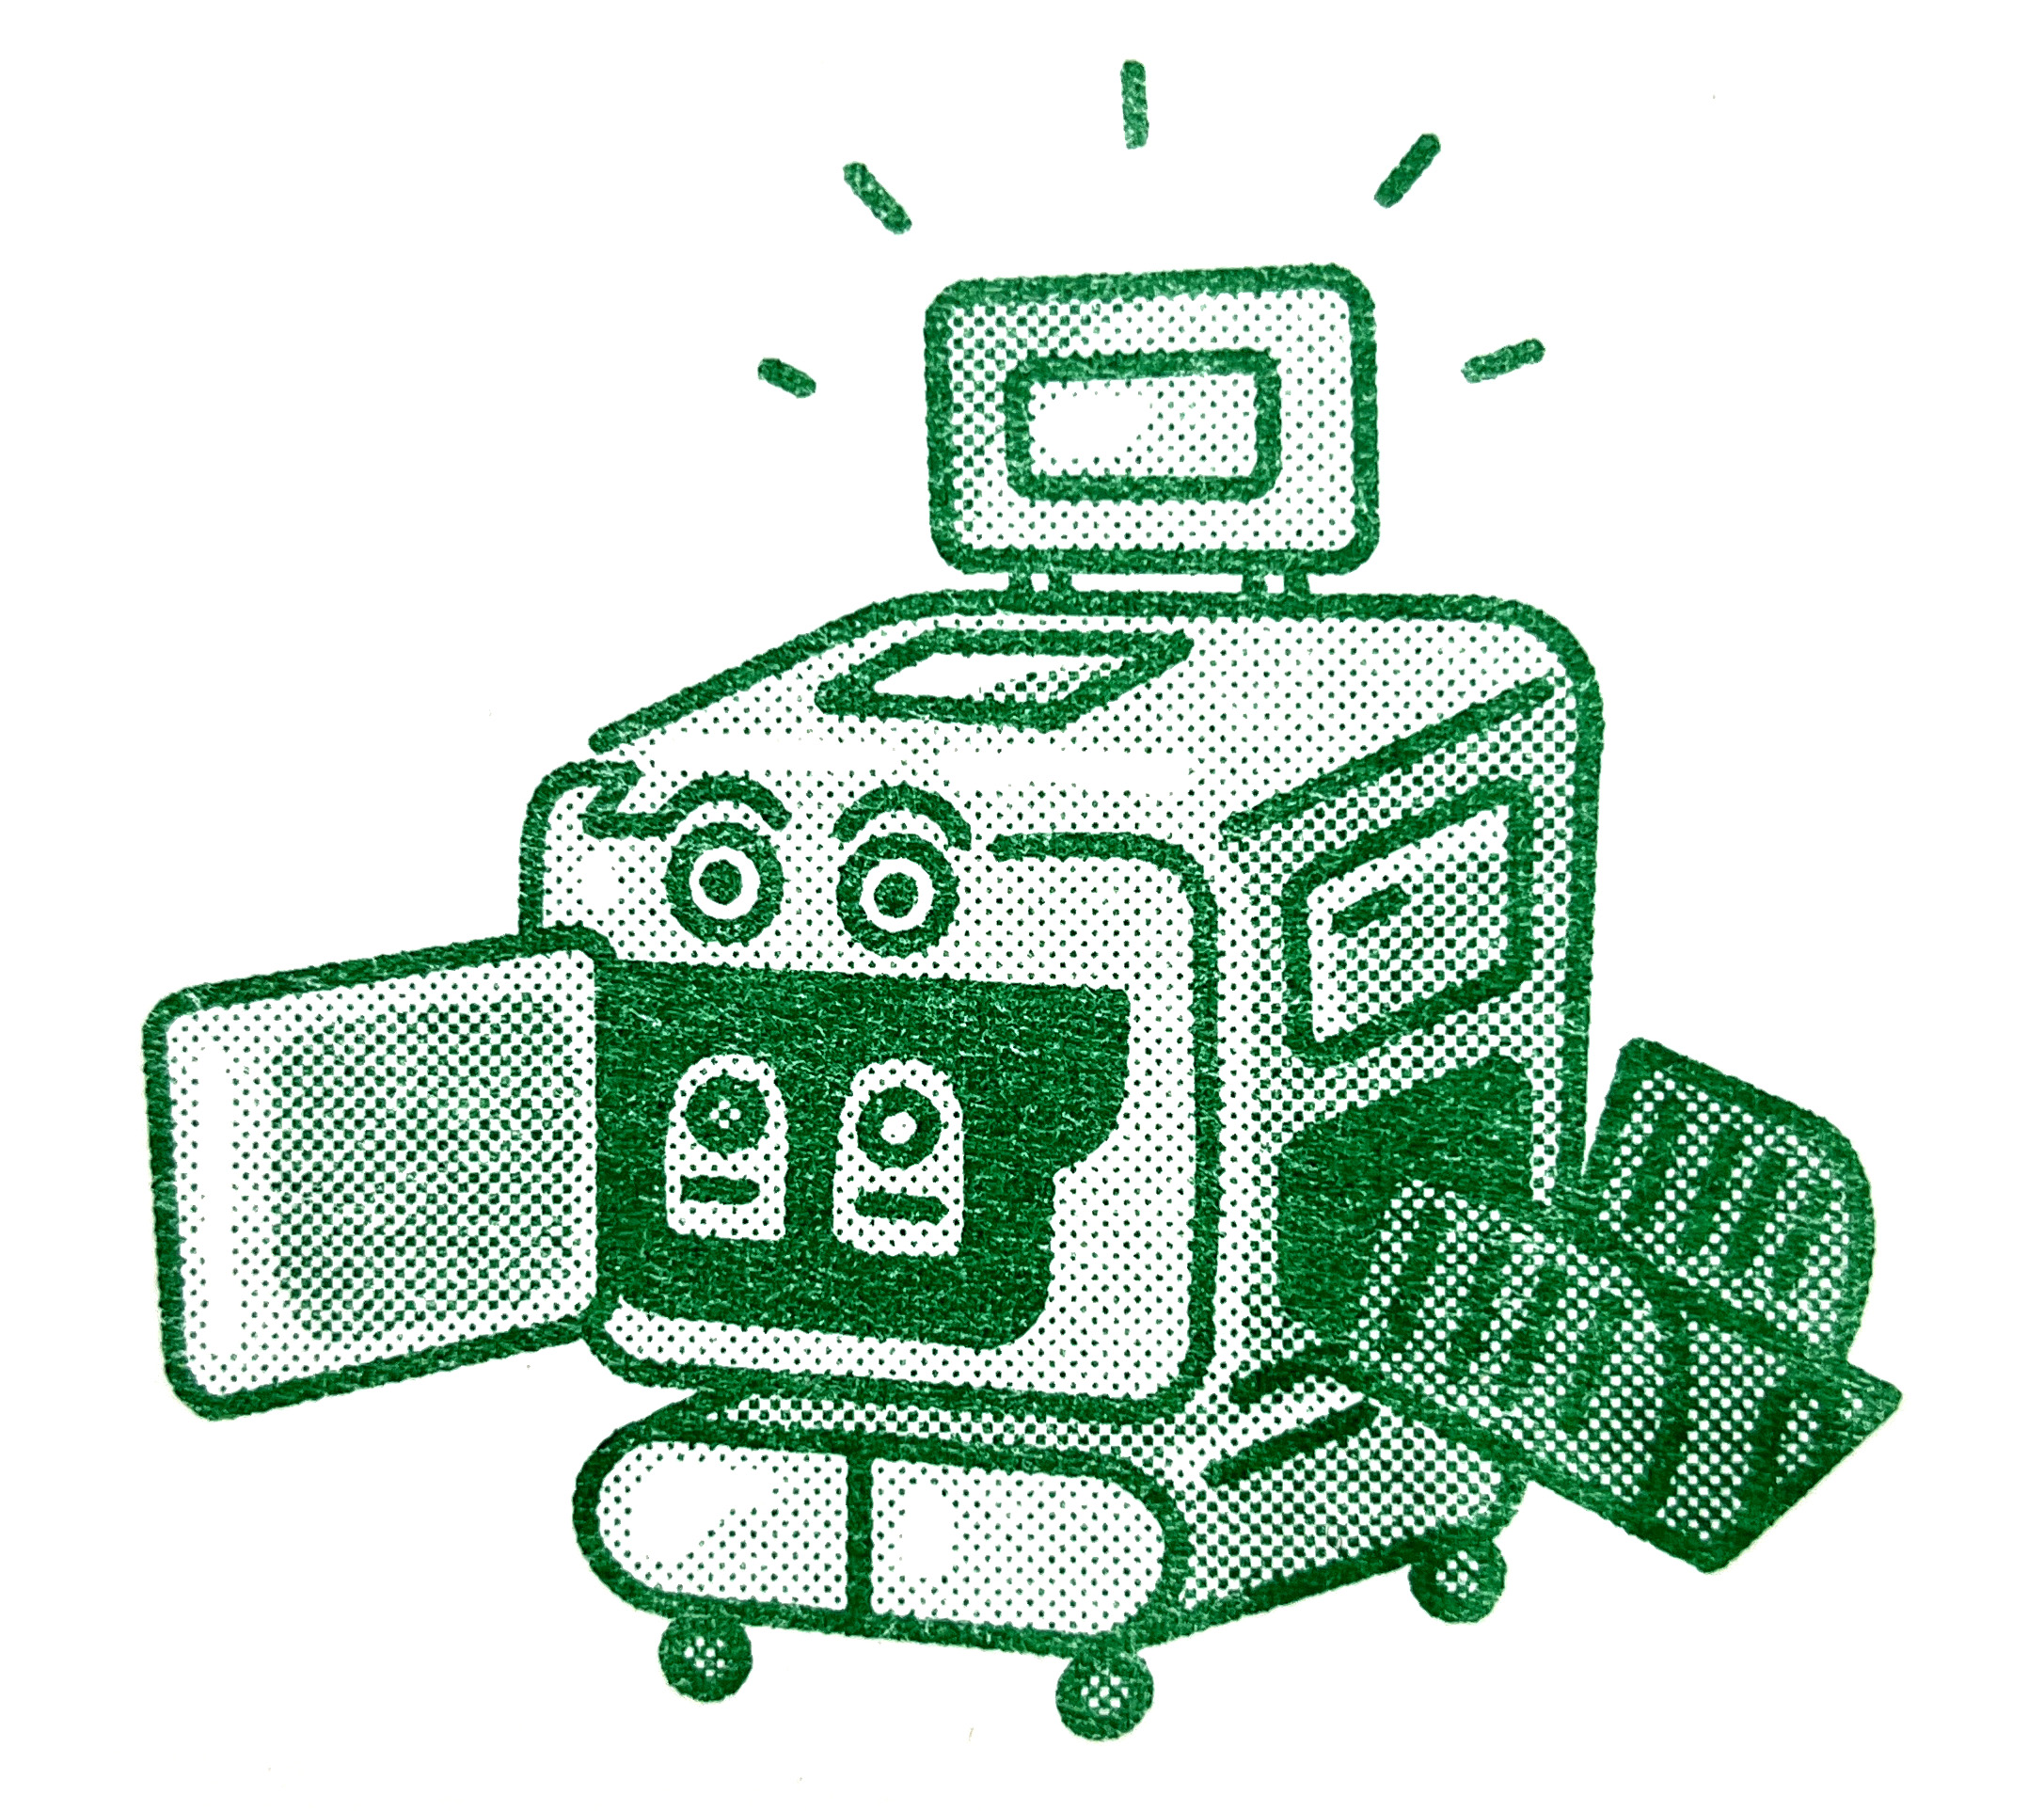 An all green illustration of a risograph printer with eyes, looking surprised or excited. 